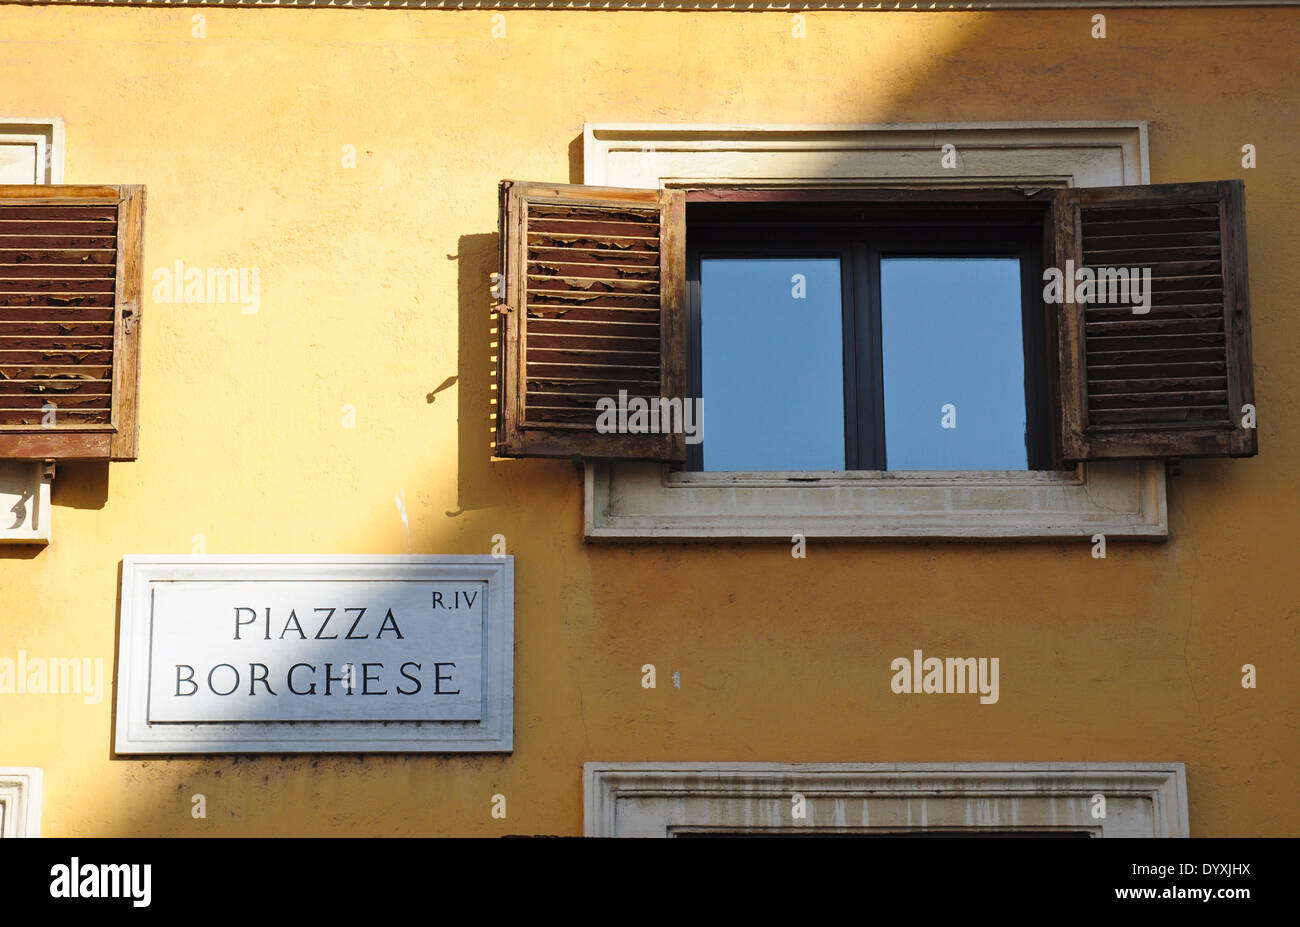 Wall sign and window, Piazza Borghese, Rome, Italy Stock Photo